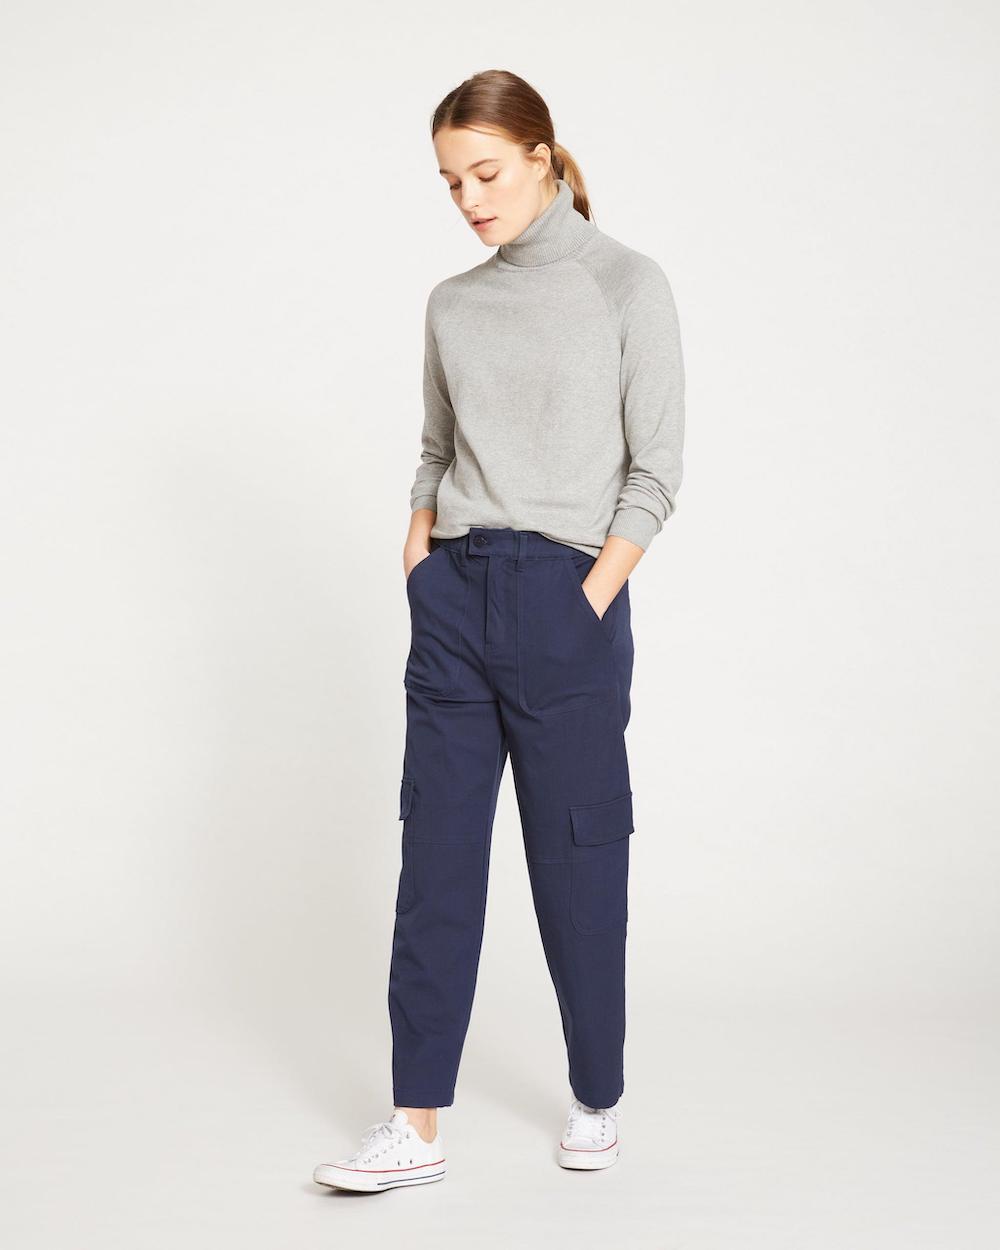 These Soft, Stretchy Pants From Universal Standard Are My New Spring Staple and Have Made Me Rethink Cargo Pants for Good